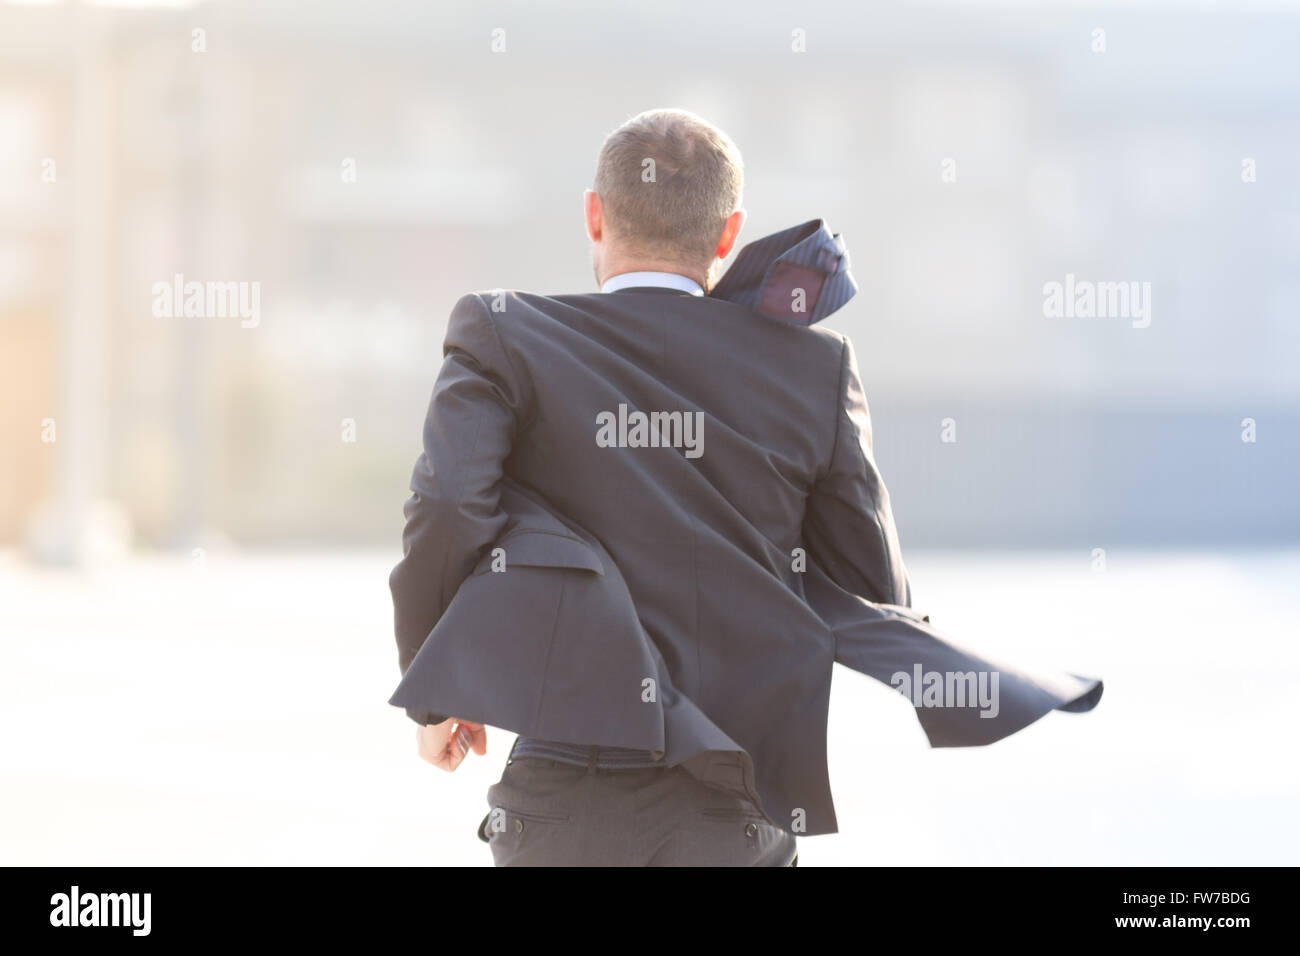 Happy businessman running outdoor in the city Stock Photo